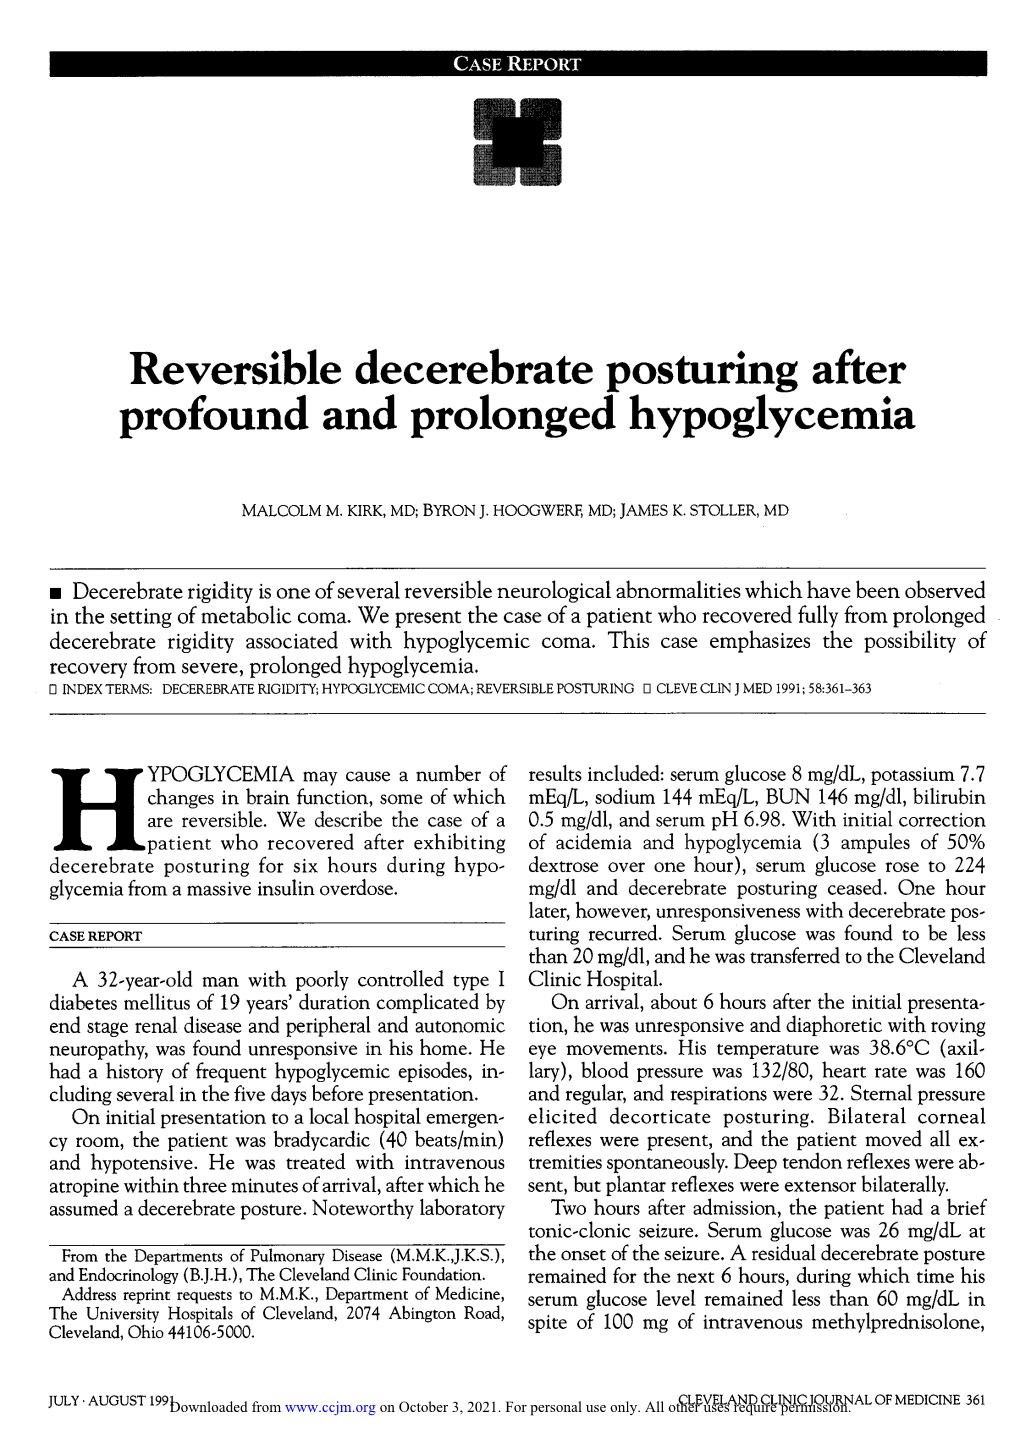 Reversible Decerebrate Posturing After Profound and Prolonged Hypoglycemia